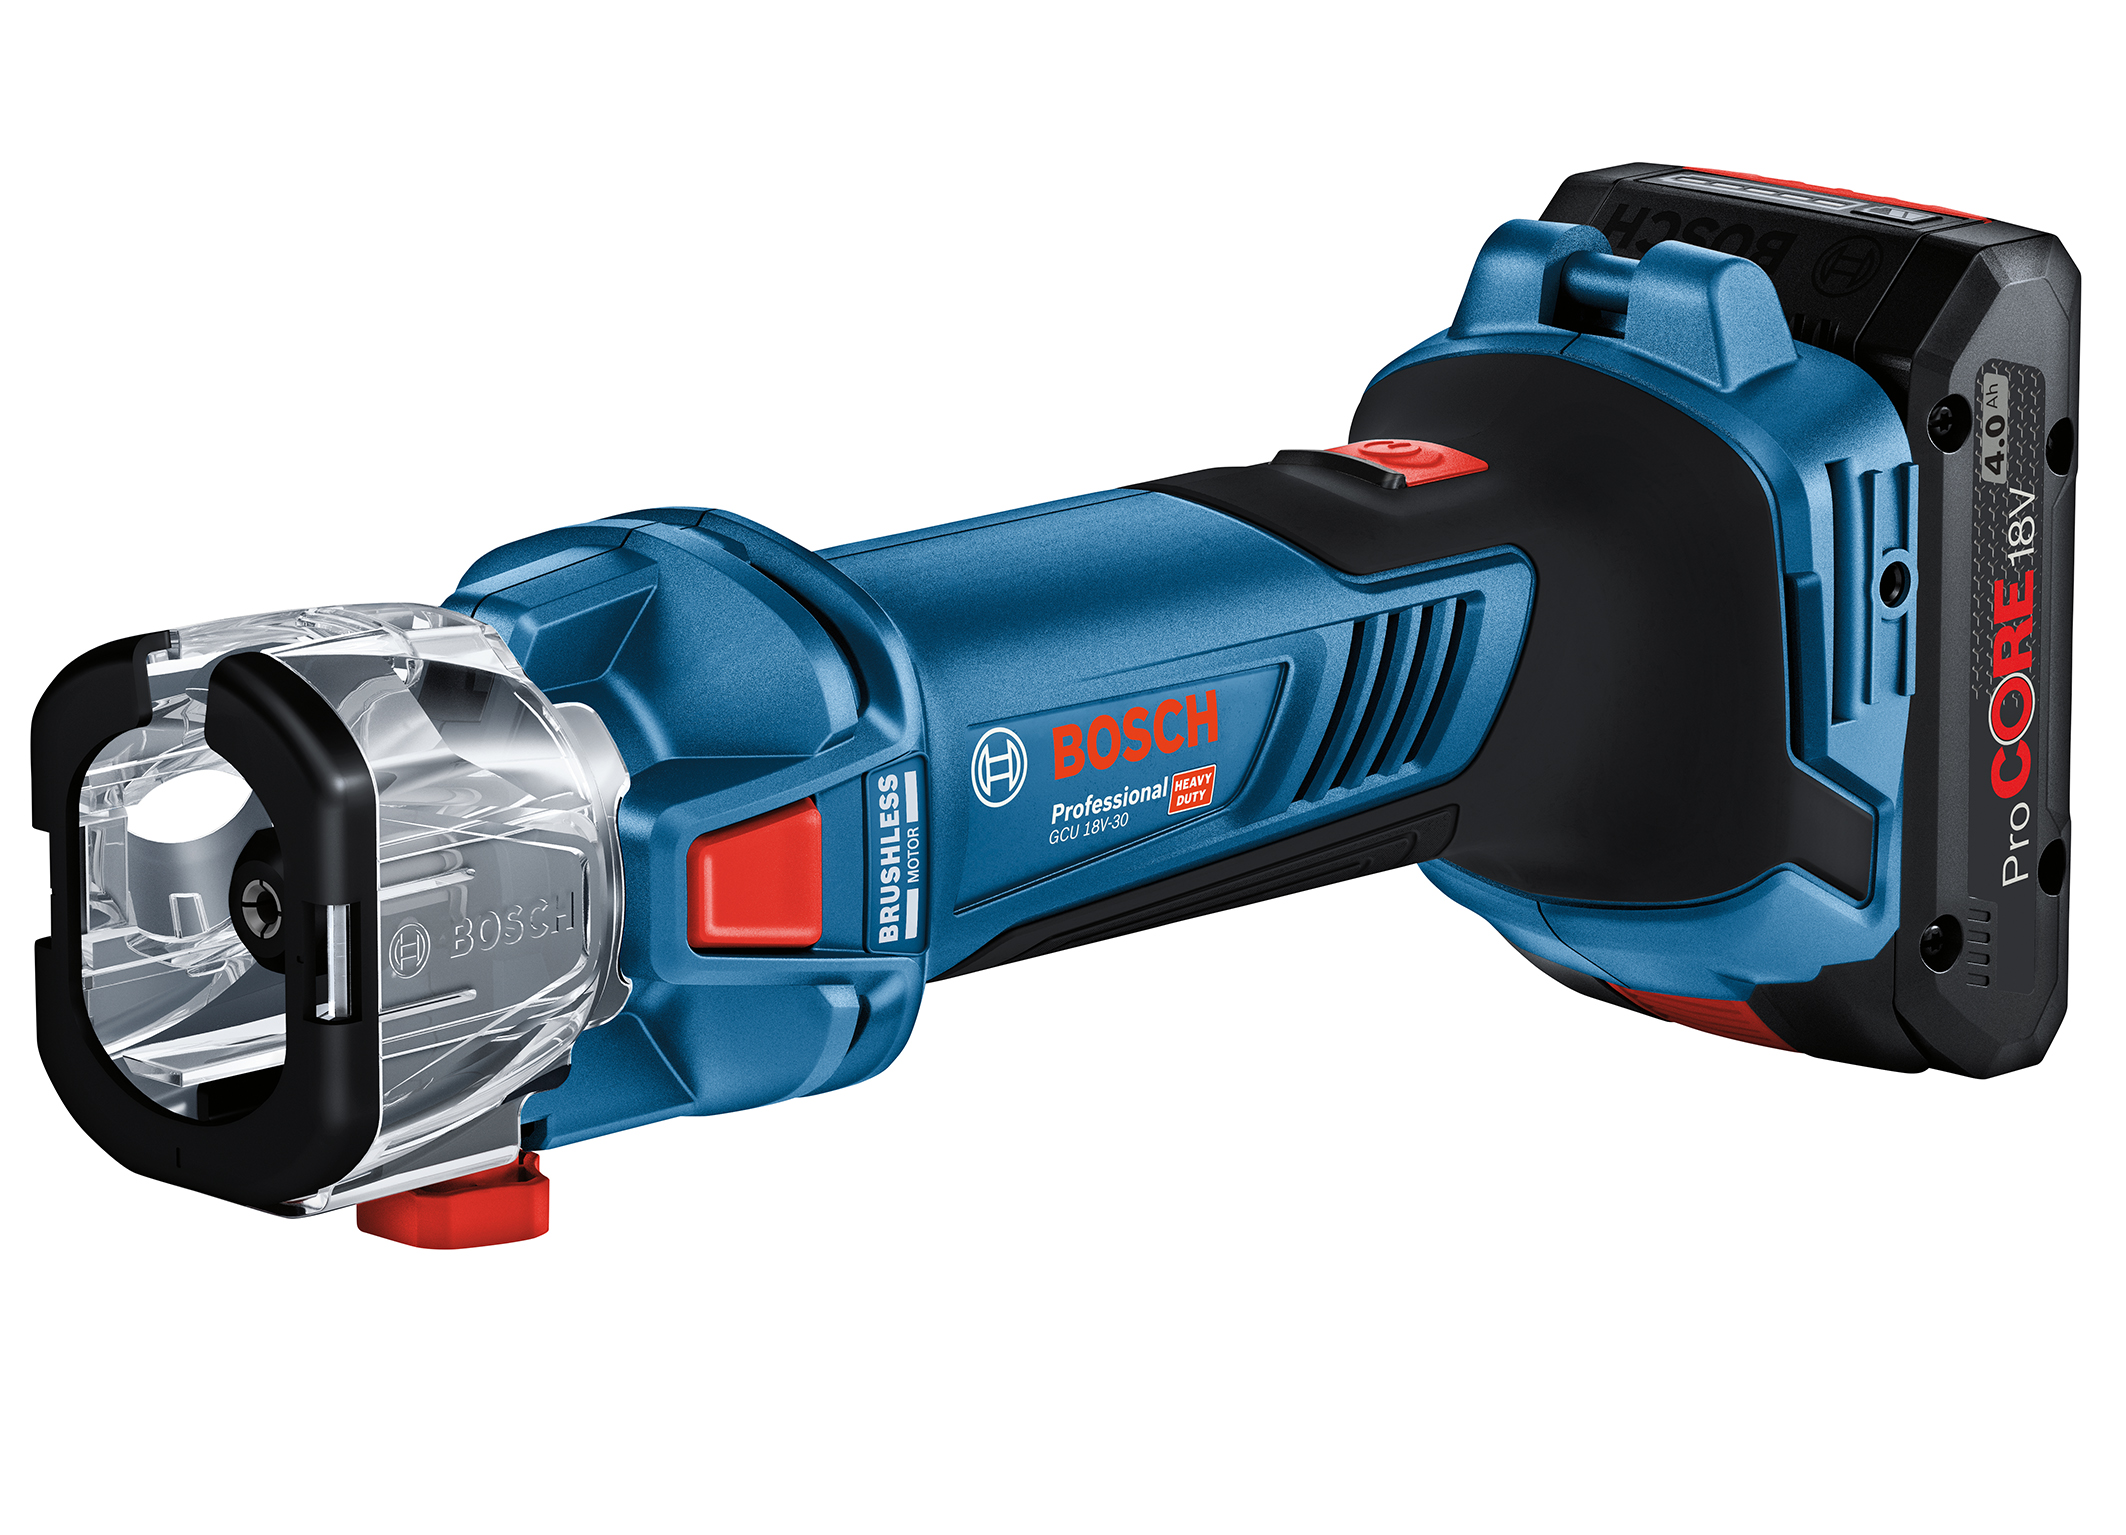 New in the ‘Professional 18V System‘: GCU 18V-30 Professional cordless cut-out tool from Bosch for professionals